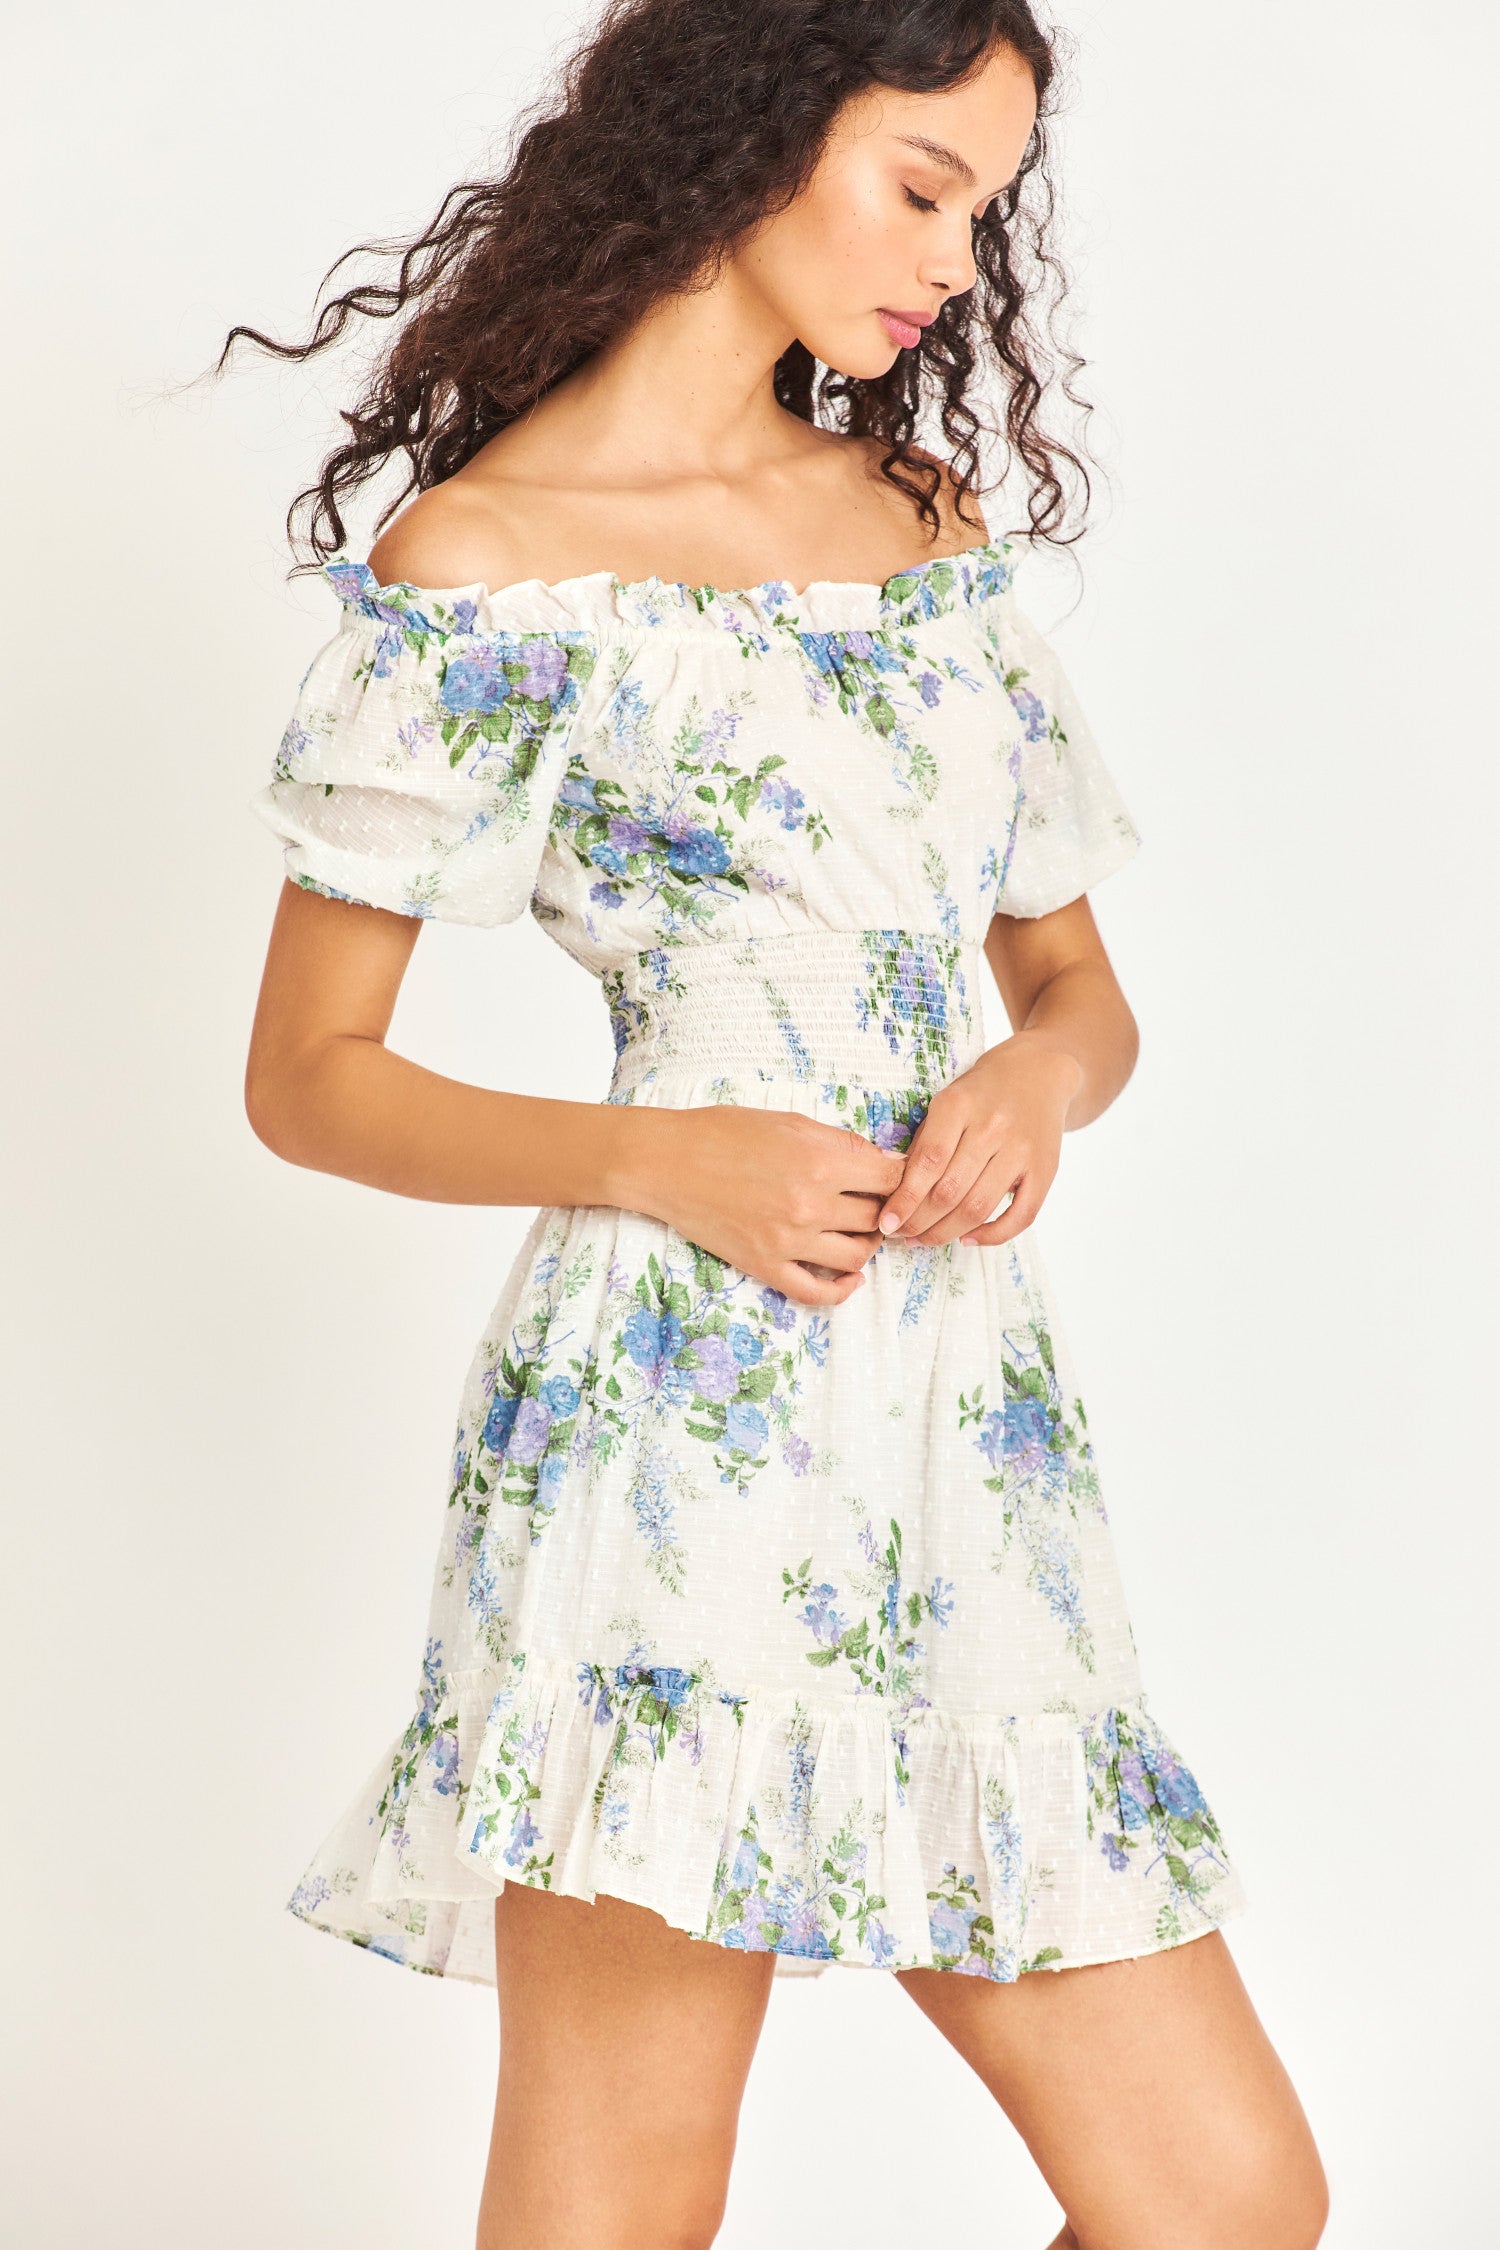 The Lai Dress in white features a blue heirloom bouquet print on a soft textured dot cotton fabric with an elasticated, ruffle-adorned neckline to be worn on or off the shoulder. It has a smocked waistband and cute puff sleeves. 